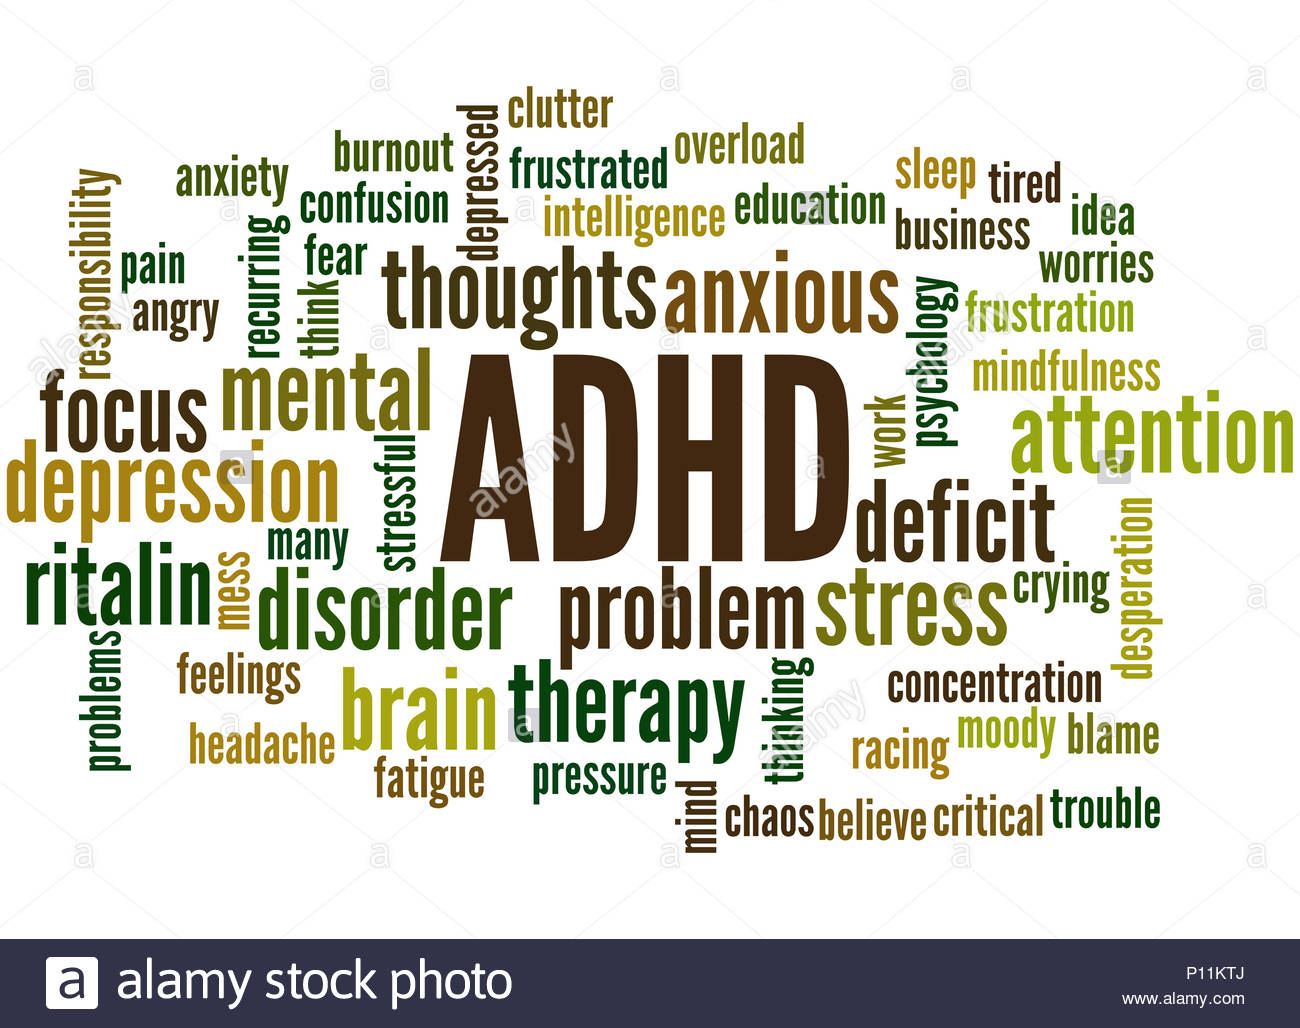 AdHD Attention Deficit Hyperactivity Disorder Word Cloud